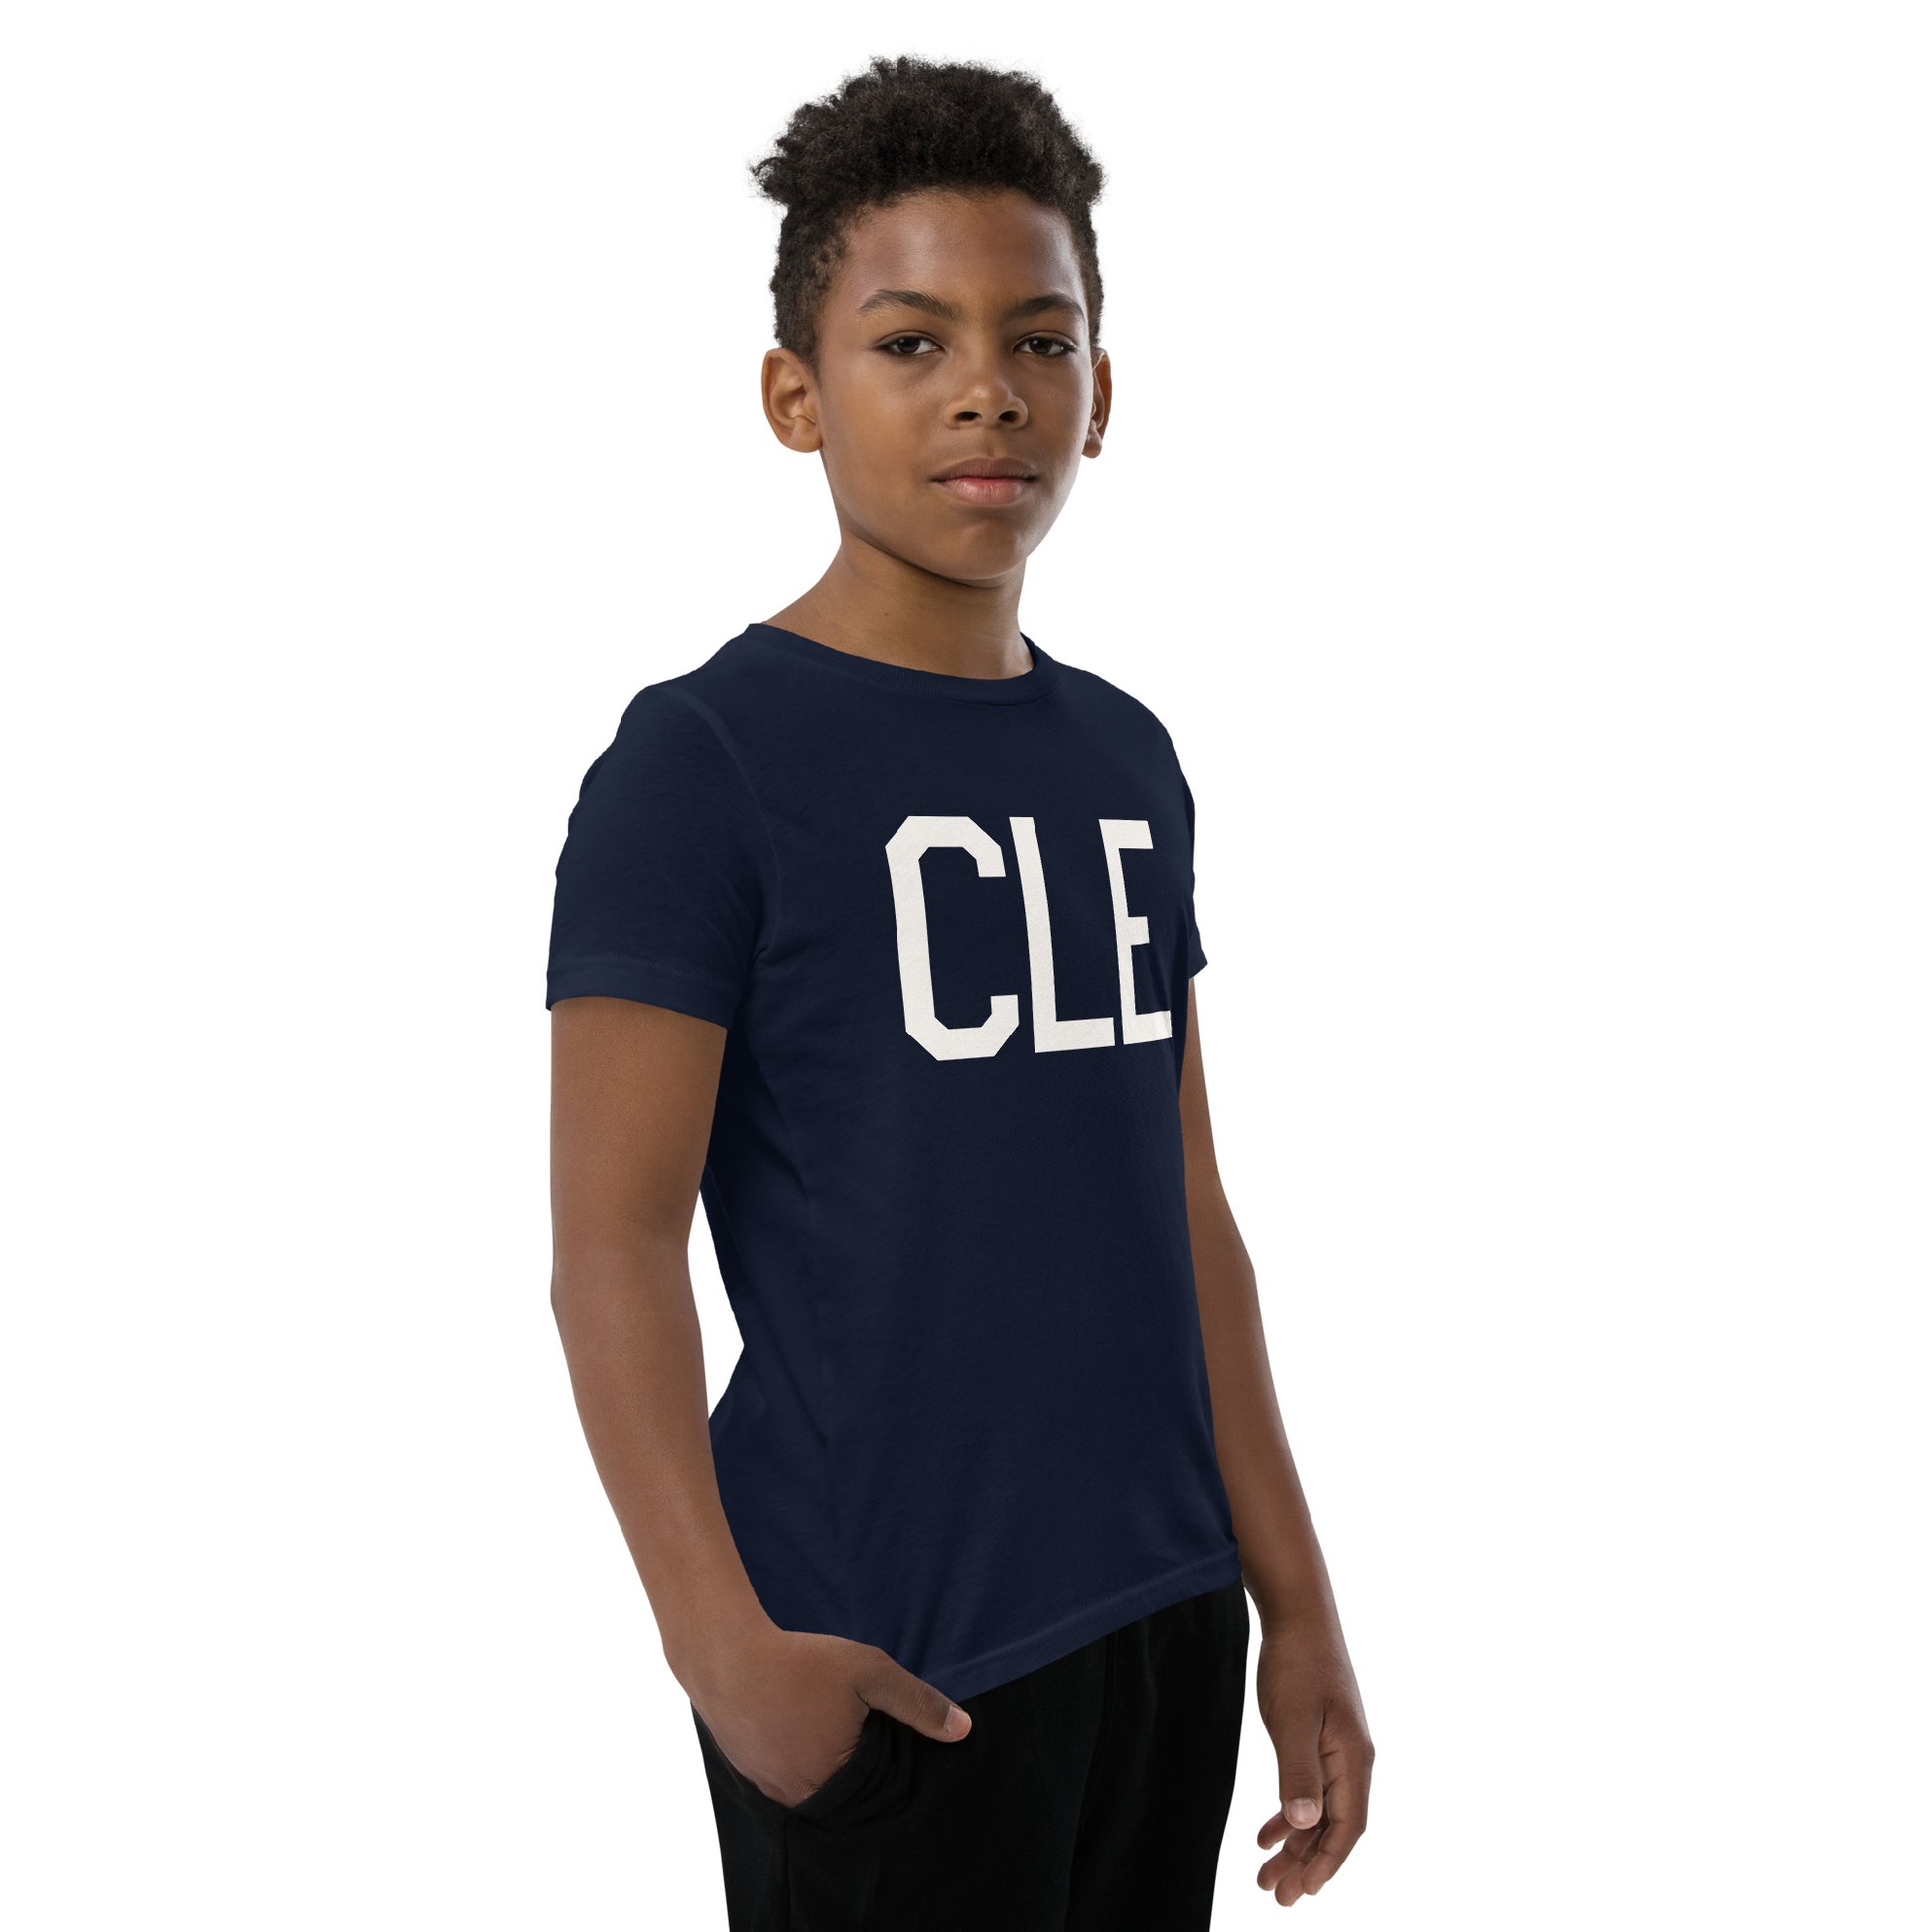 Kid's T-Shirt - White Graphic • CLE Cleveland • YHM Designs - Image 08